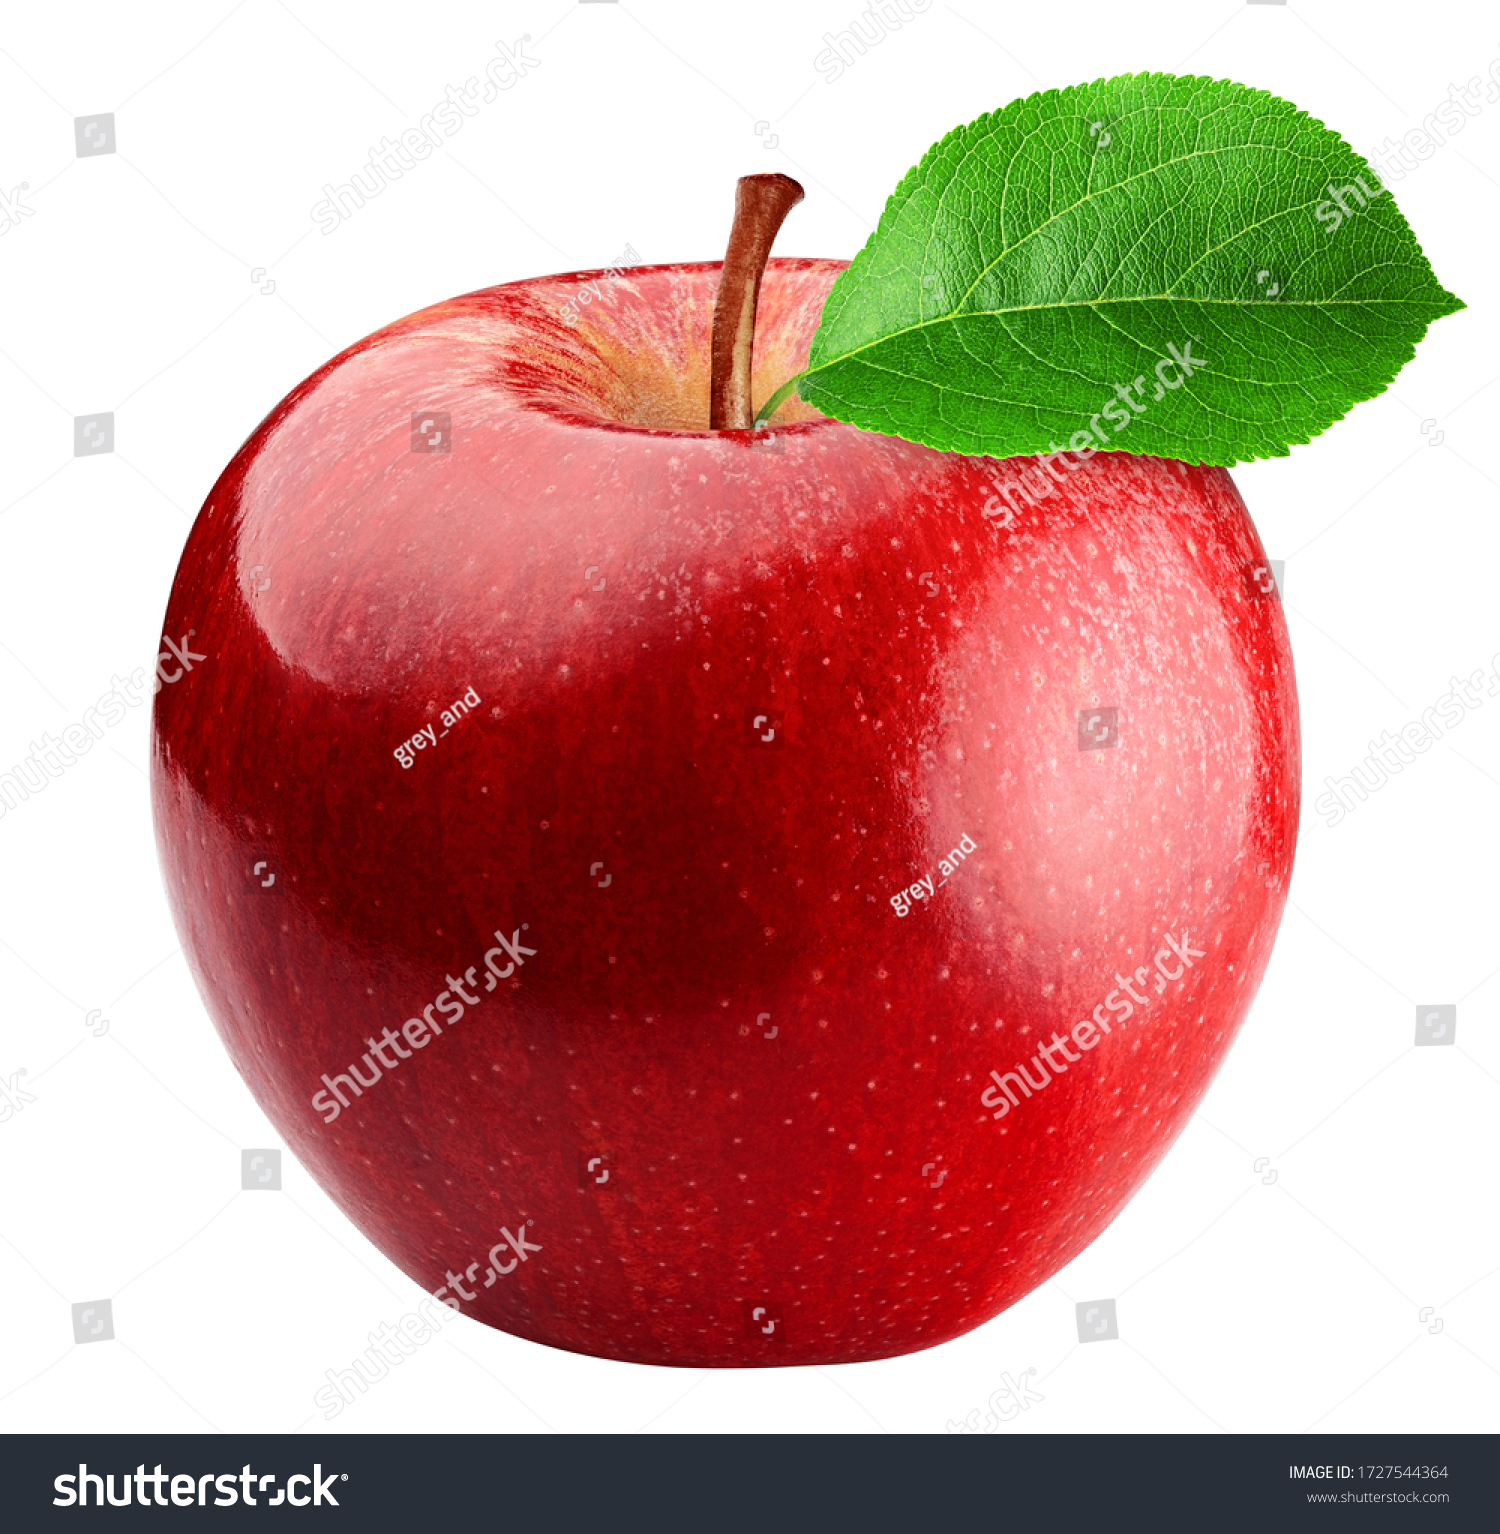 Red apple isolated on white background, clipping path, full depth of field #1727544364